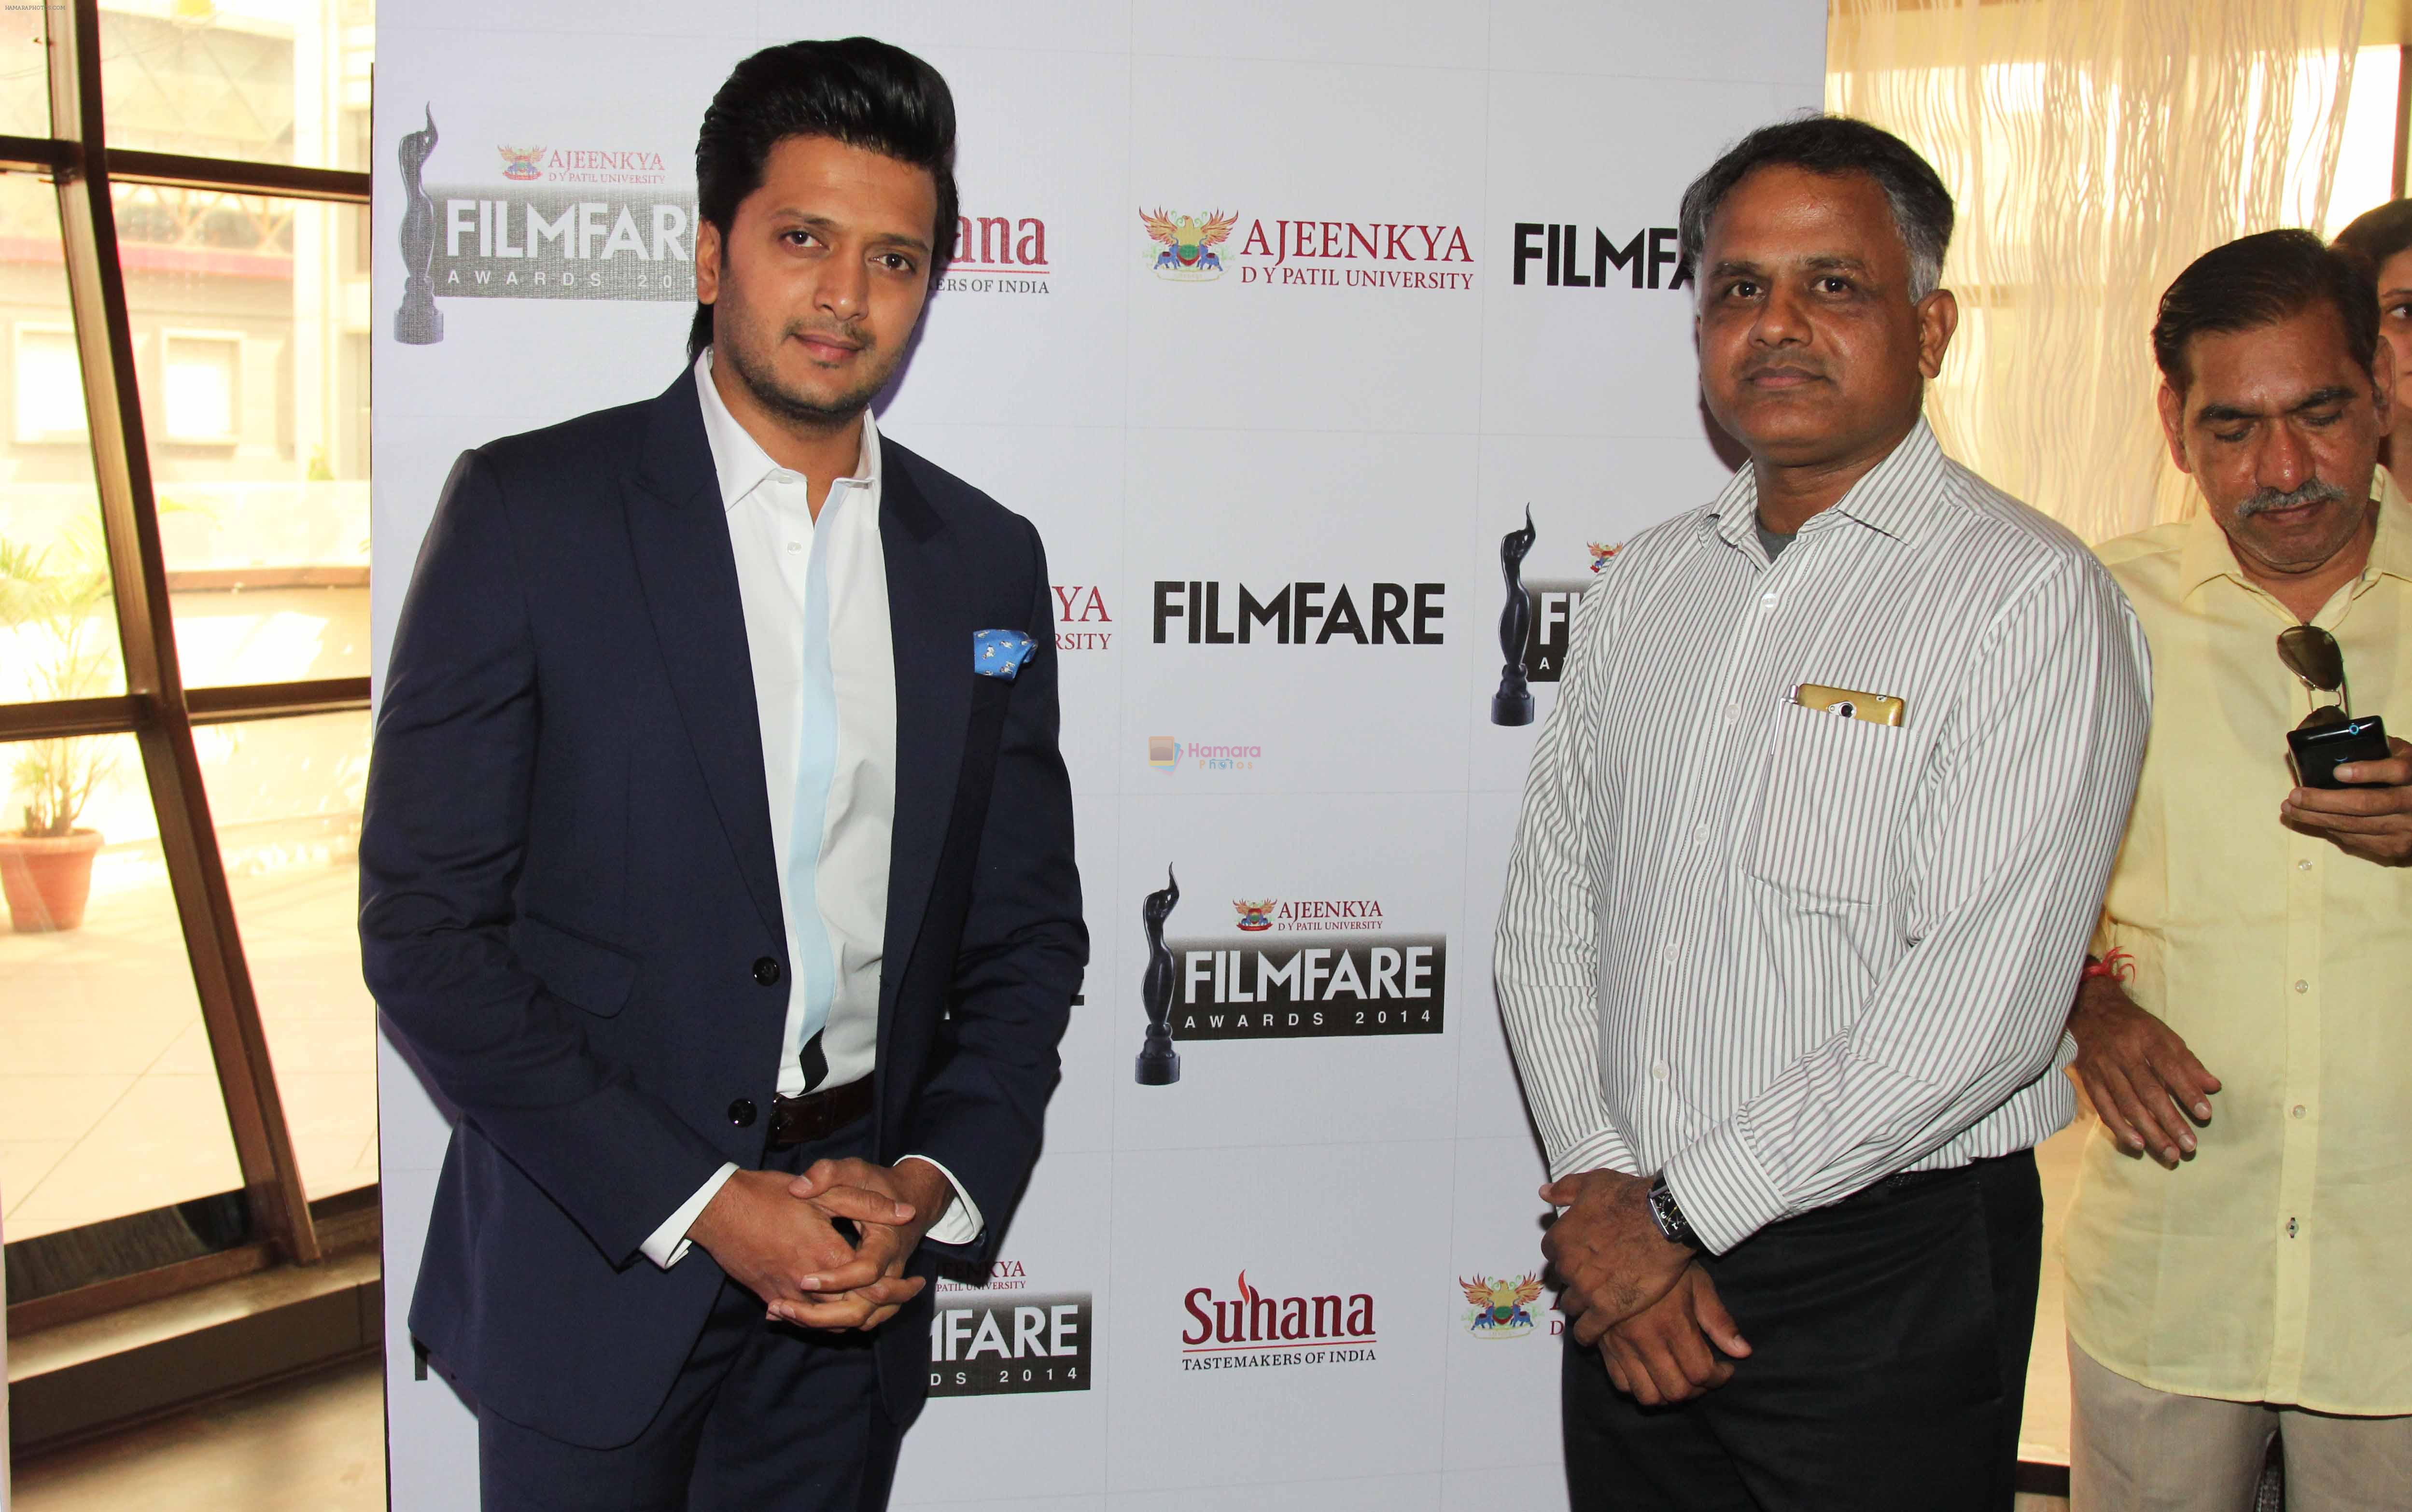 Mr. Riteish Deshmukh alongwith one of the sponcer at the Launch Press Conference of _Ajeenkya DY Patil University Filmfare Awards 2014_